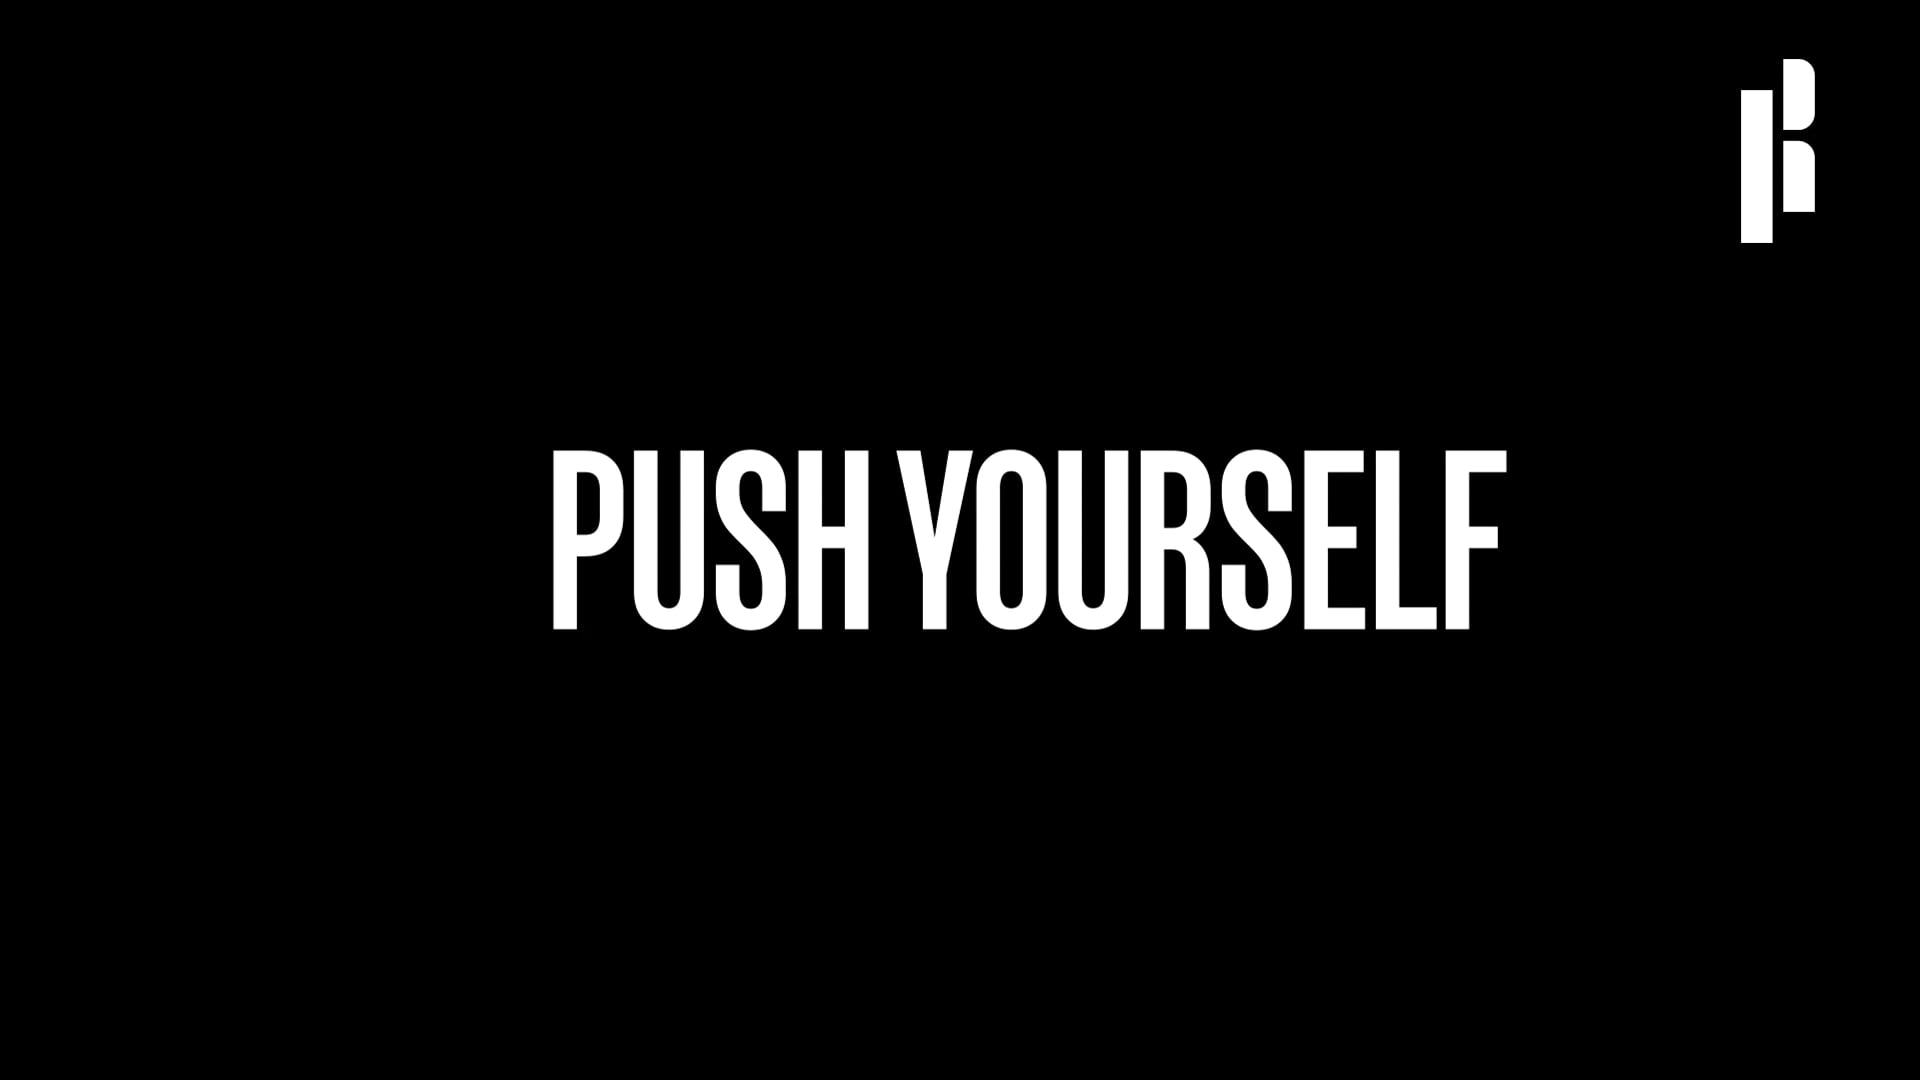 A black background with the words push yourself on it.